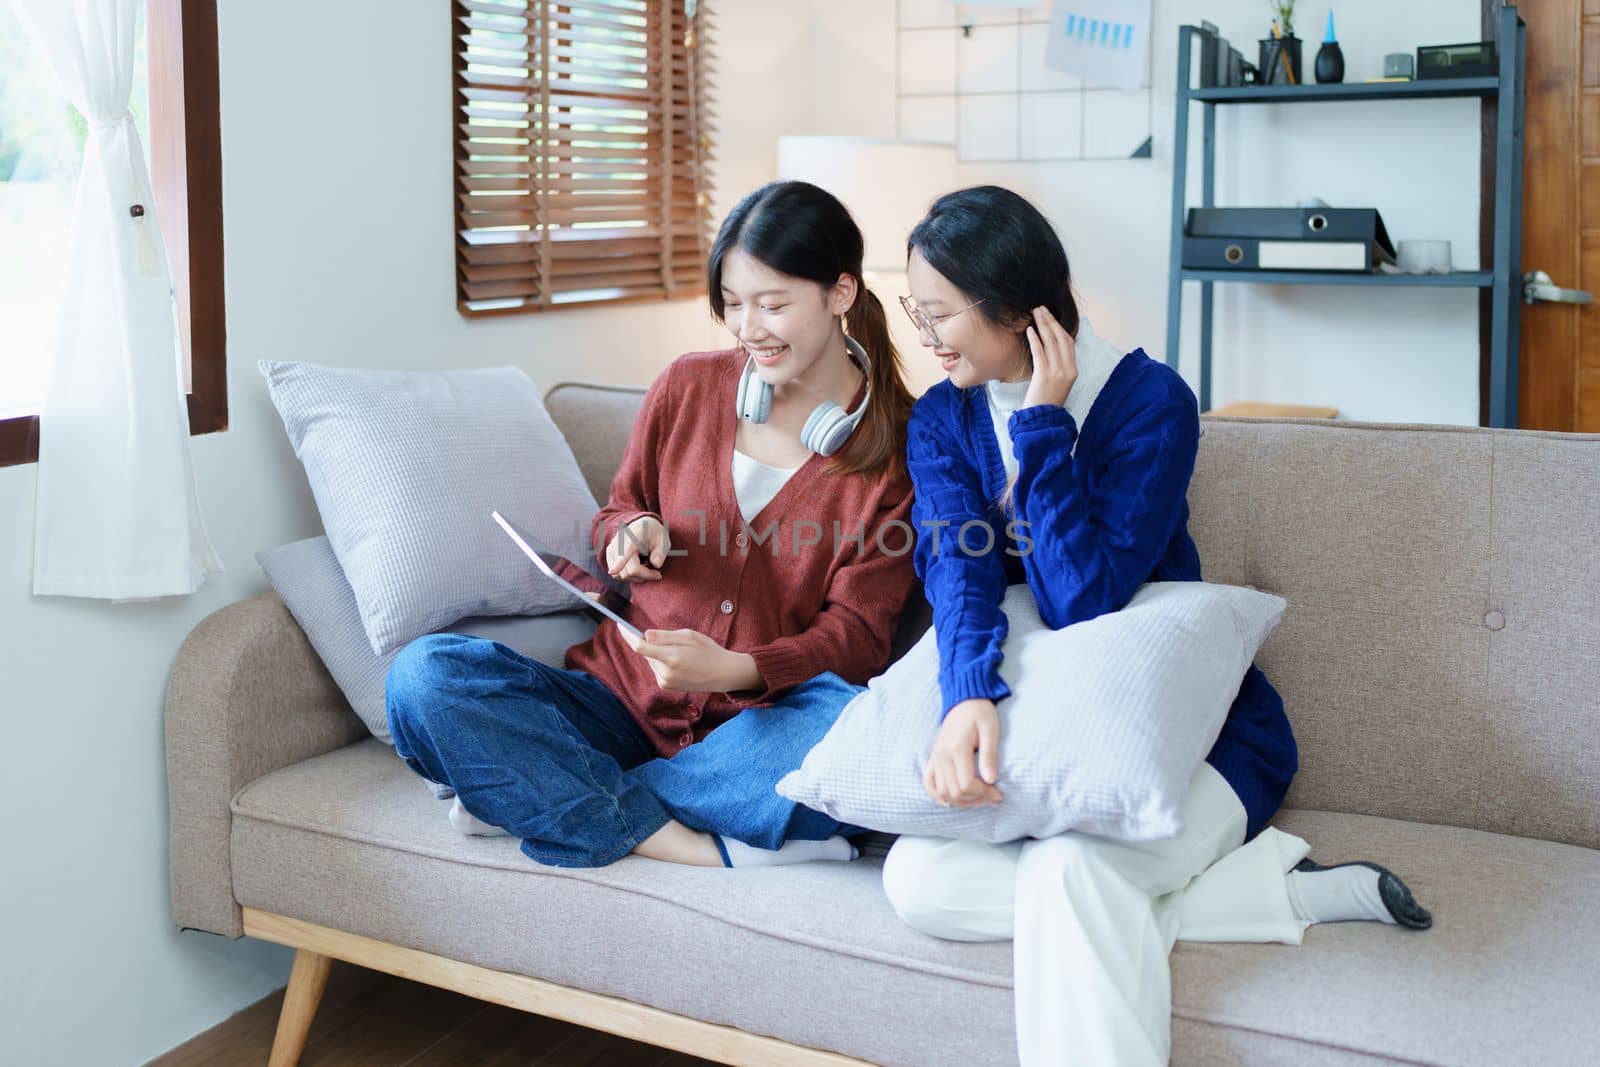 lgbtq, lgbt concept, homosexuality, portrait of two asian women enjoying together and showing love for each other while using tablet.